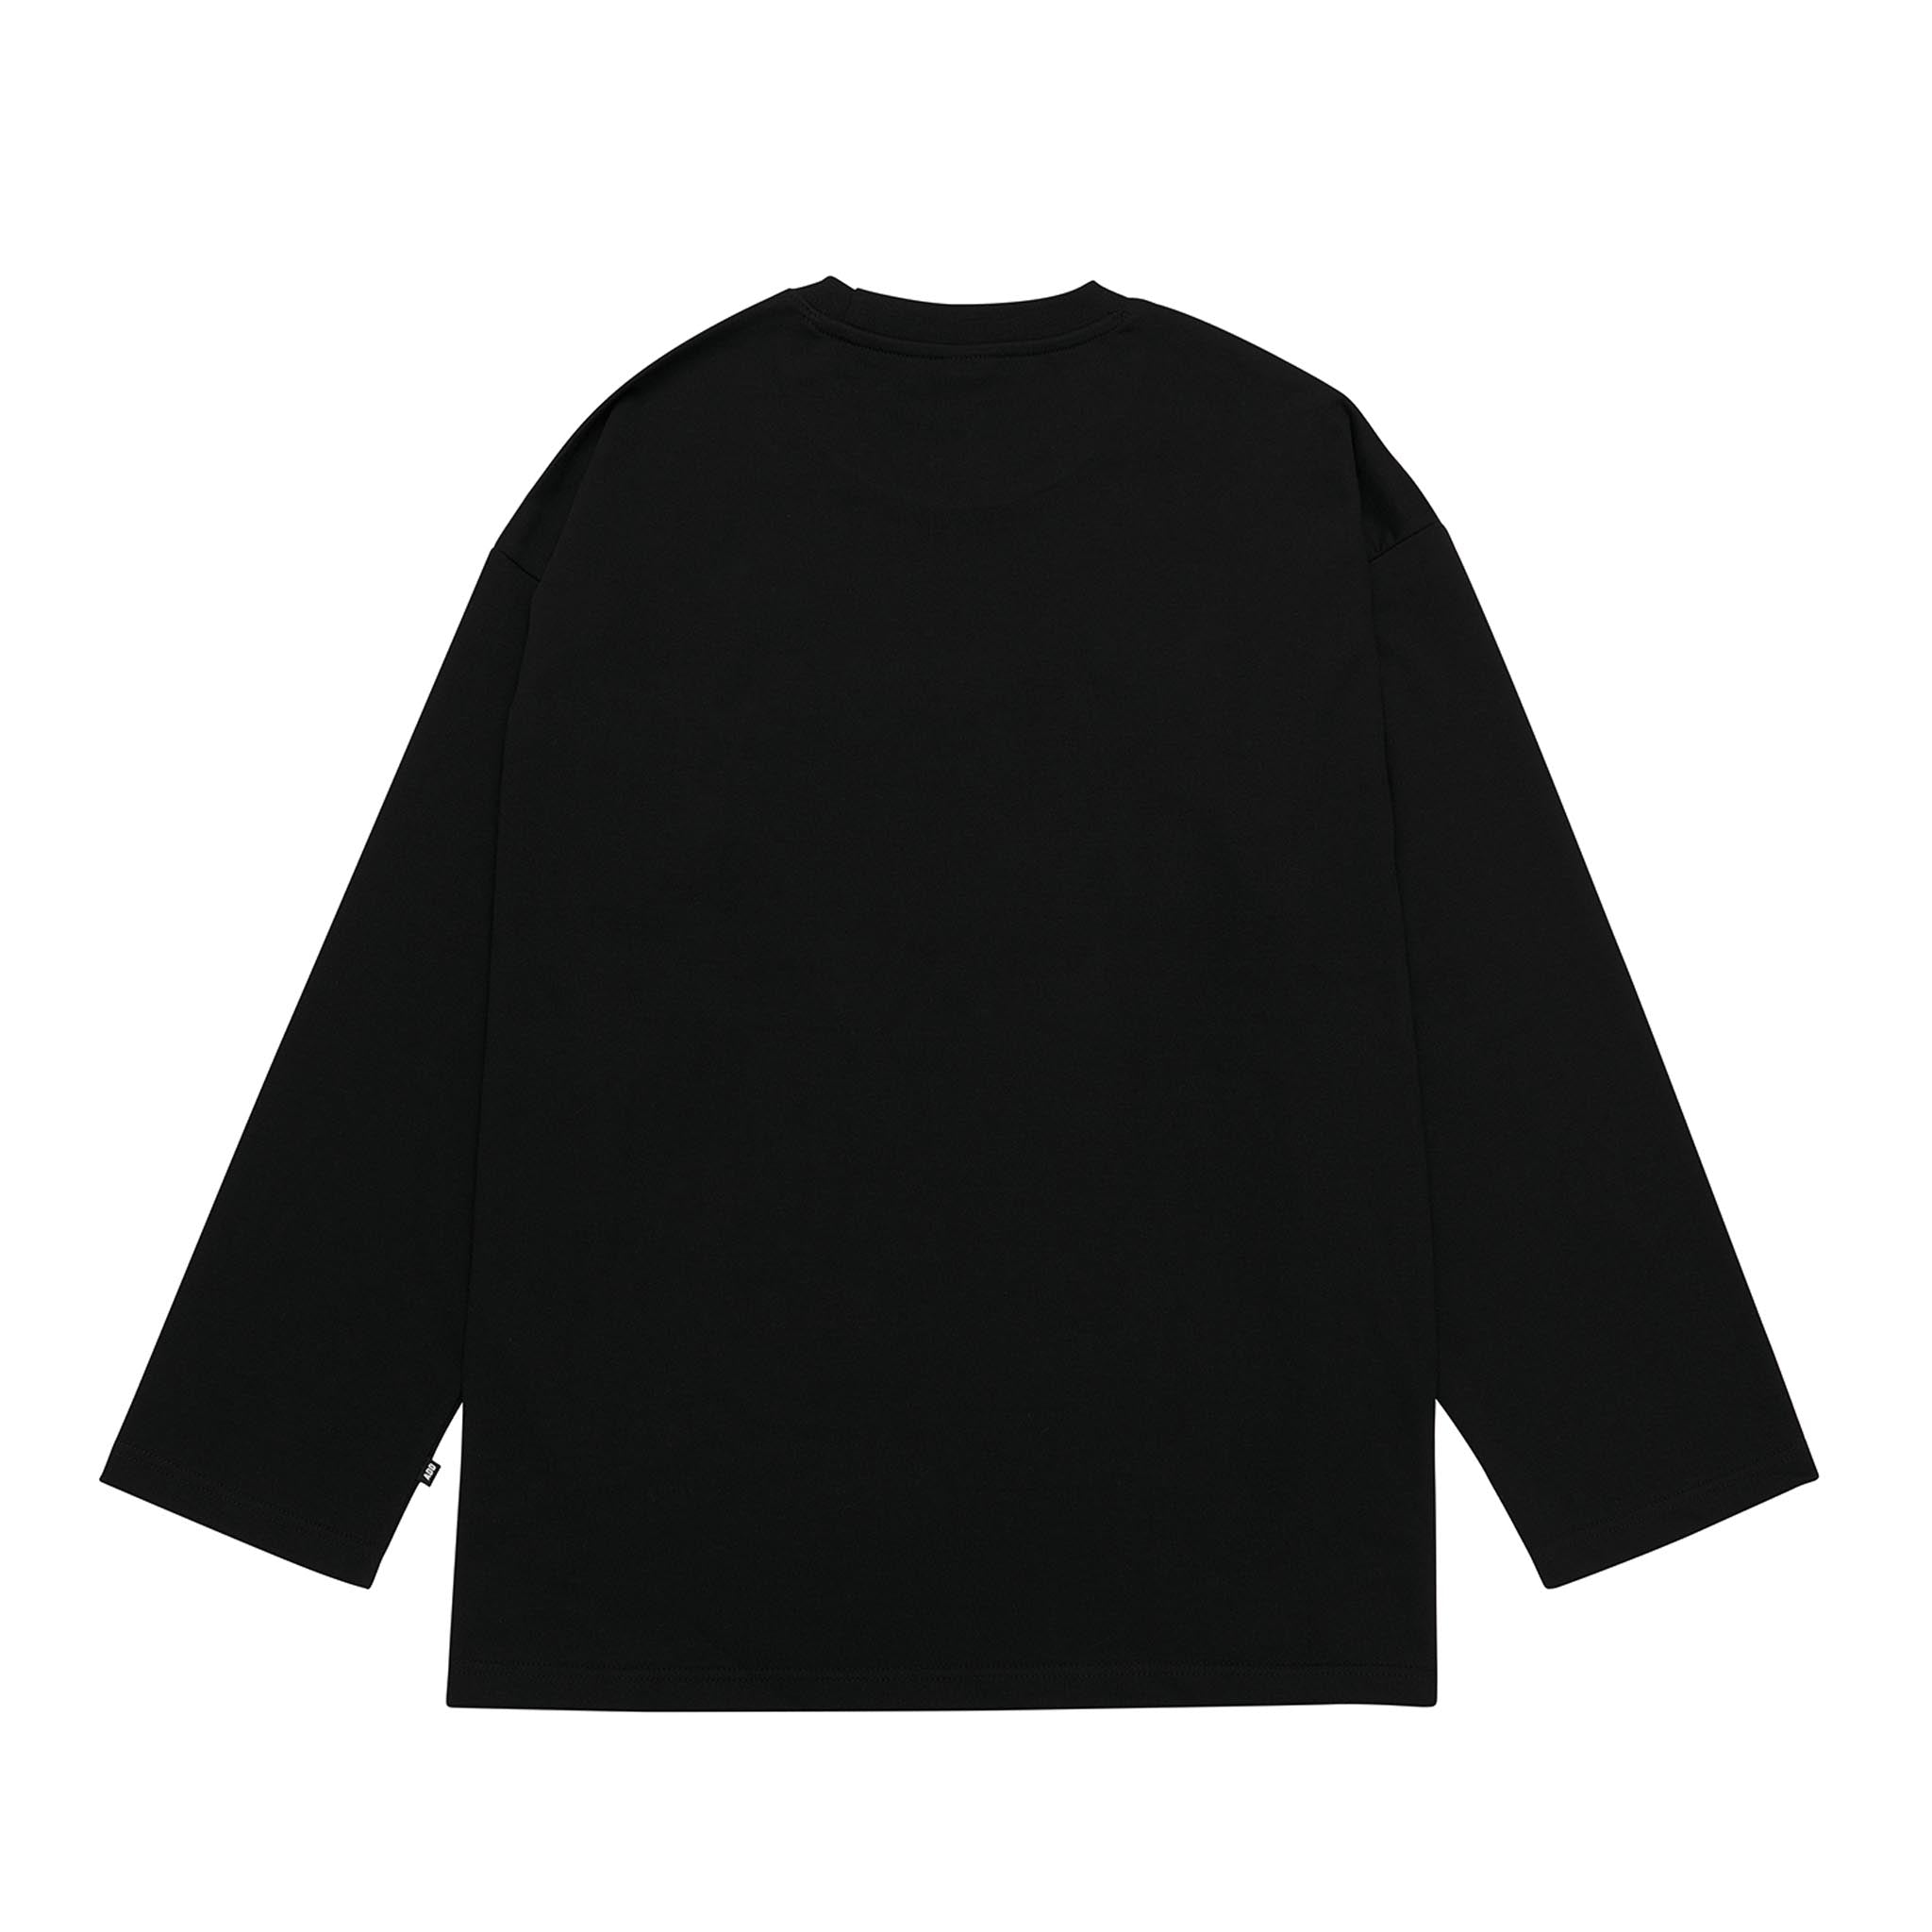 ADD Houndstooth Stamp L/S Tee Black